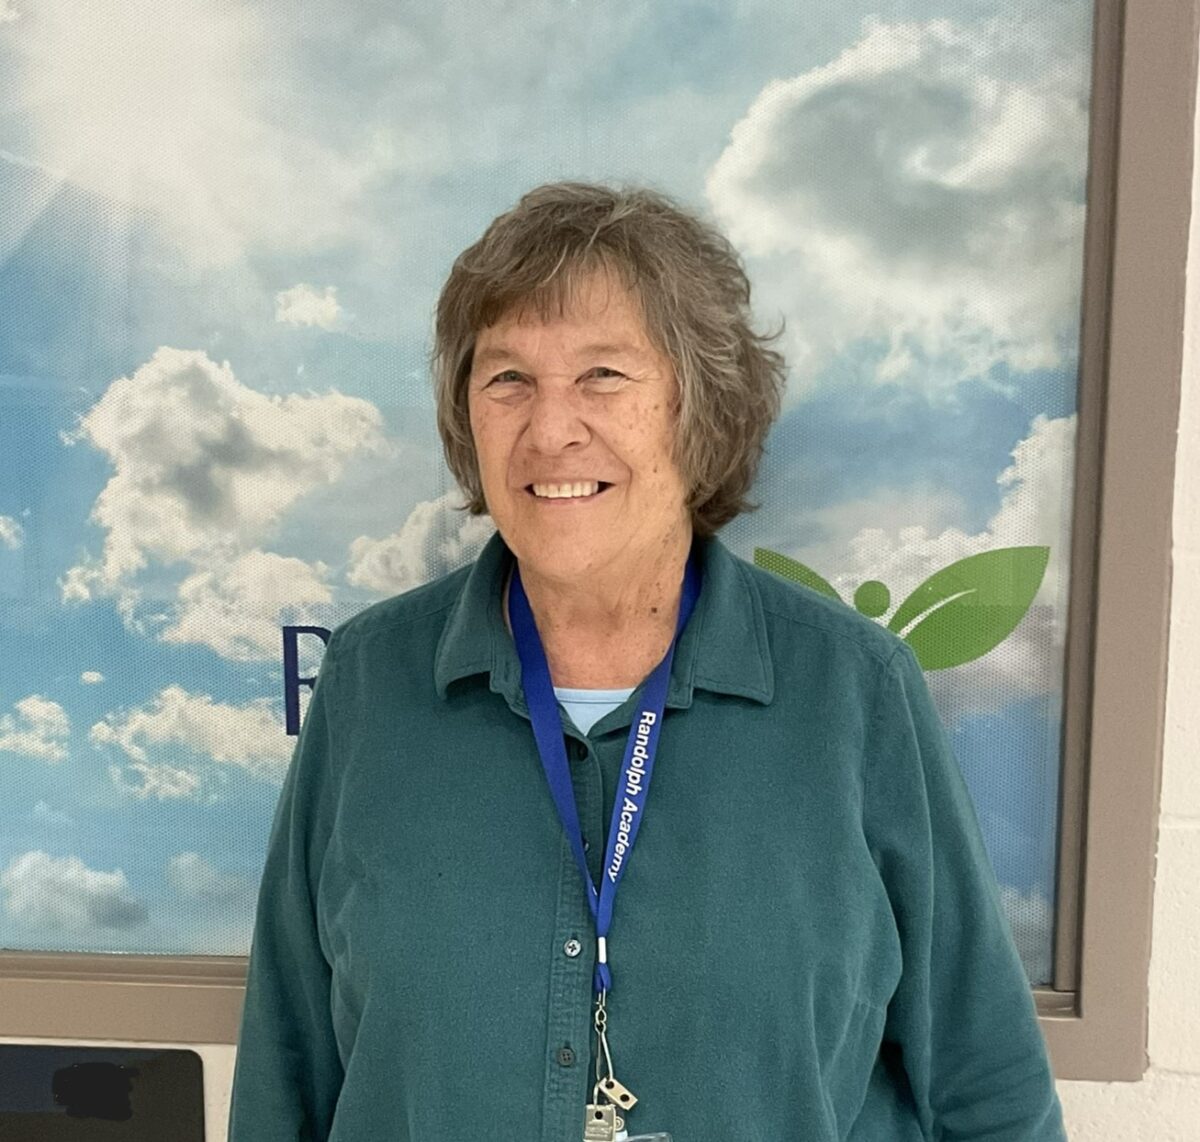 School Counselor Provides ‘Ray’ of Sunshine for 30 Years